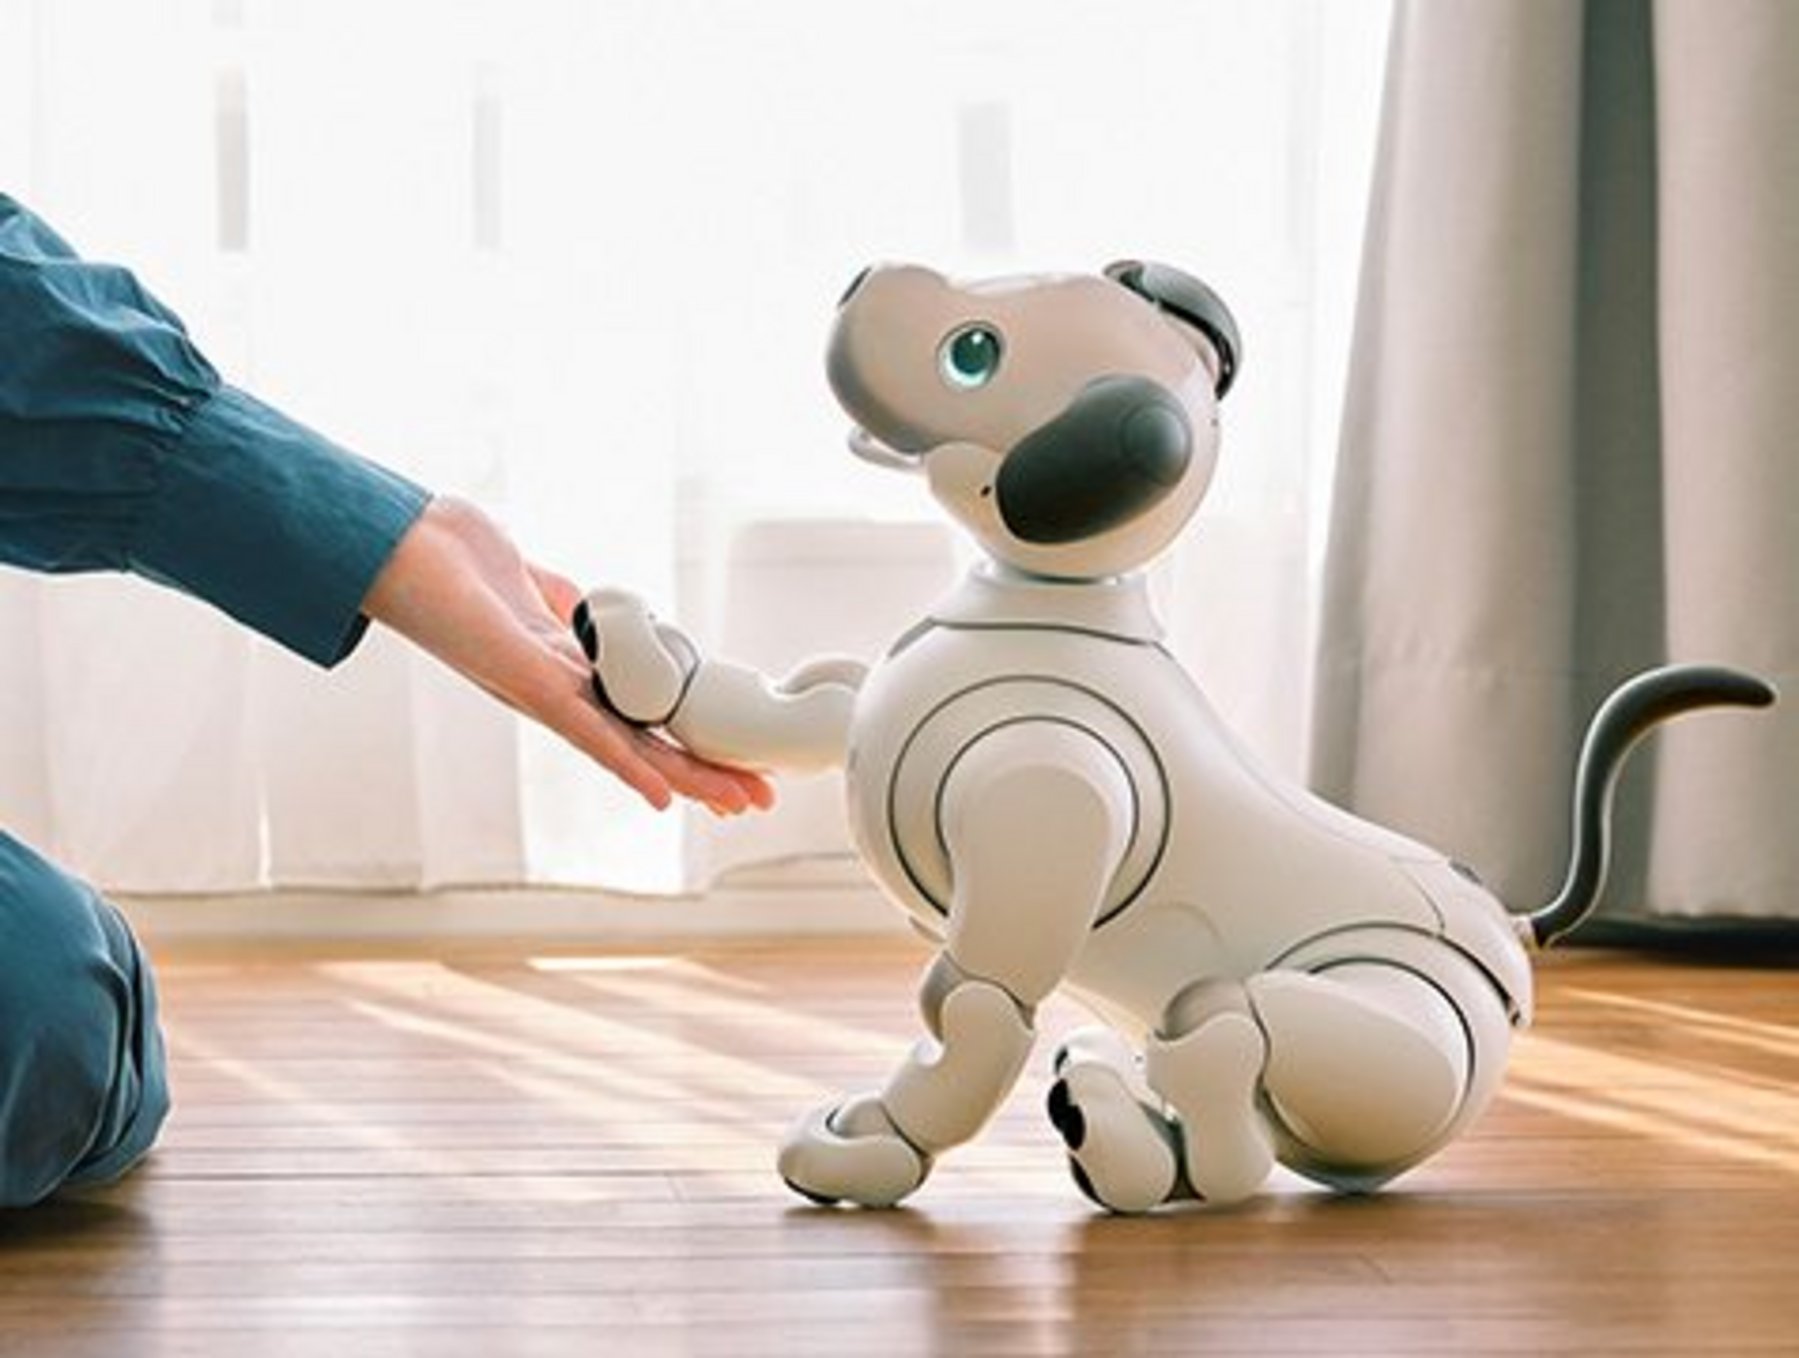 Meet Miko, India's First 'Emotionally Intelligent' Companion Robot for Kids